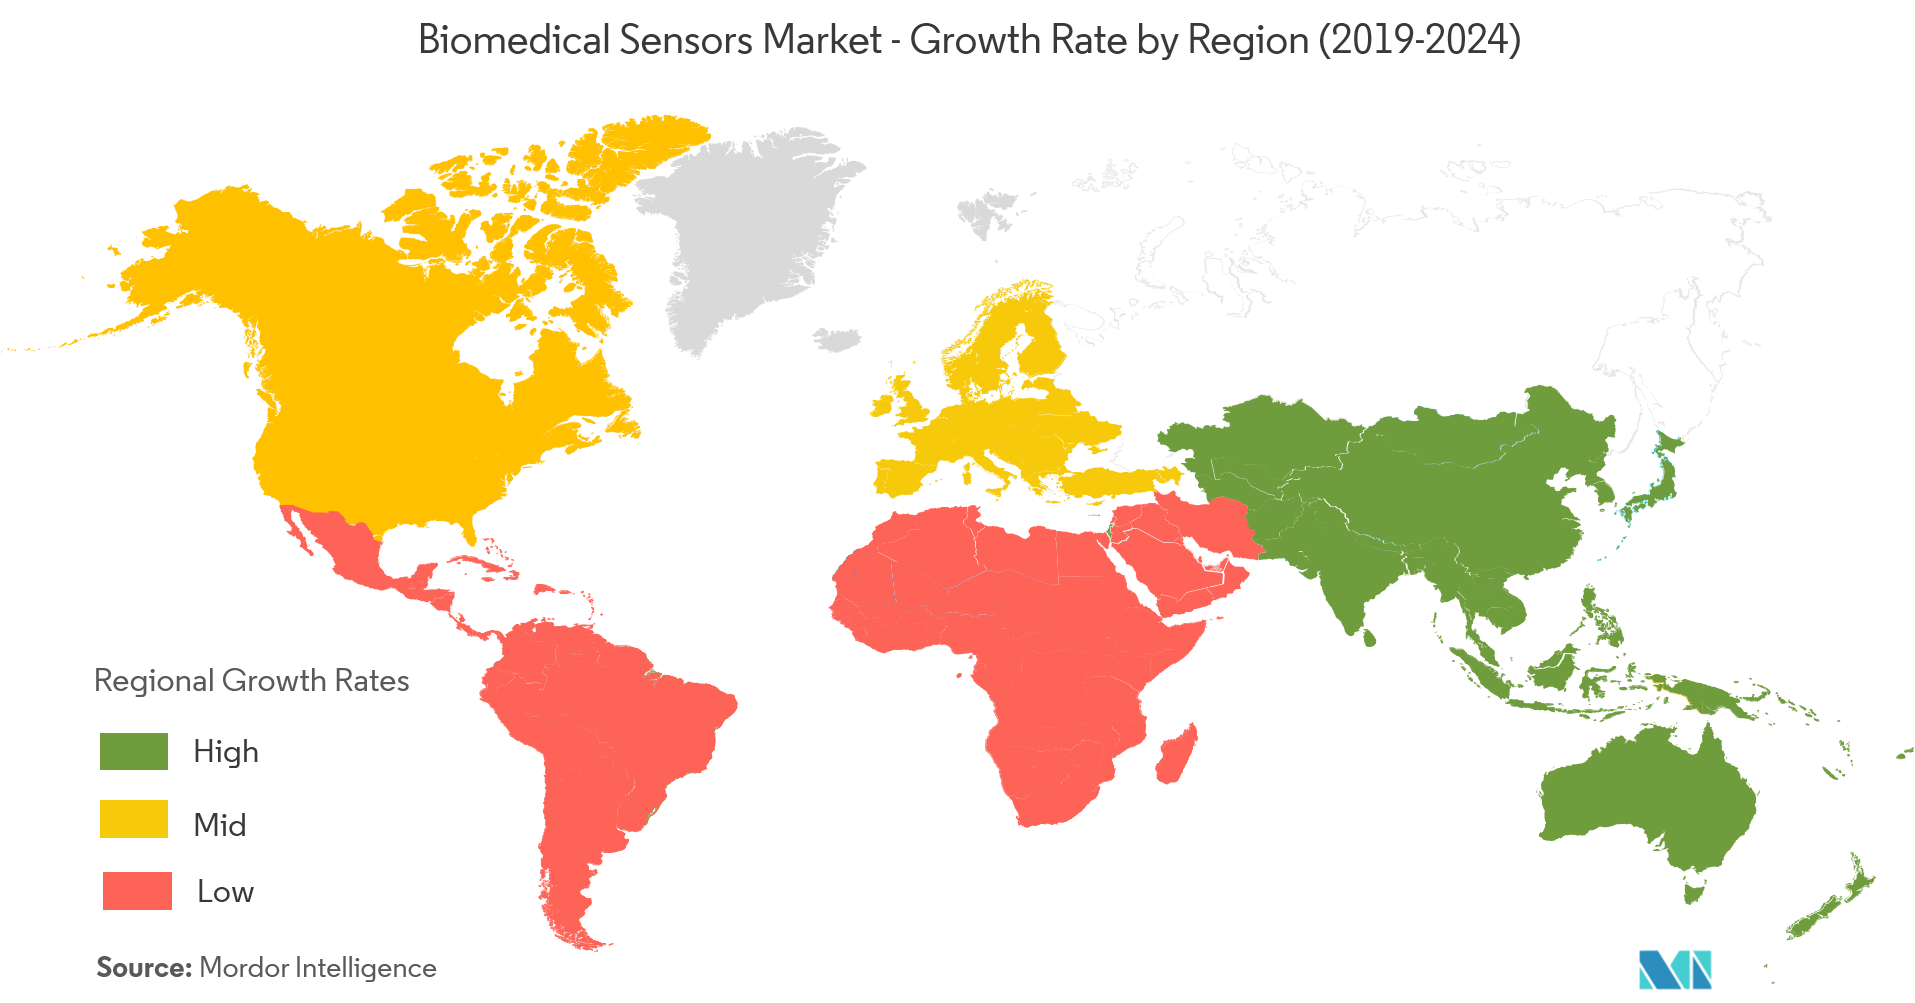 Biomedical Sensors Market - Growth Rate by Region (2019 - 2024)